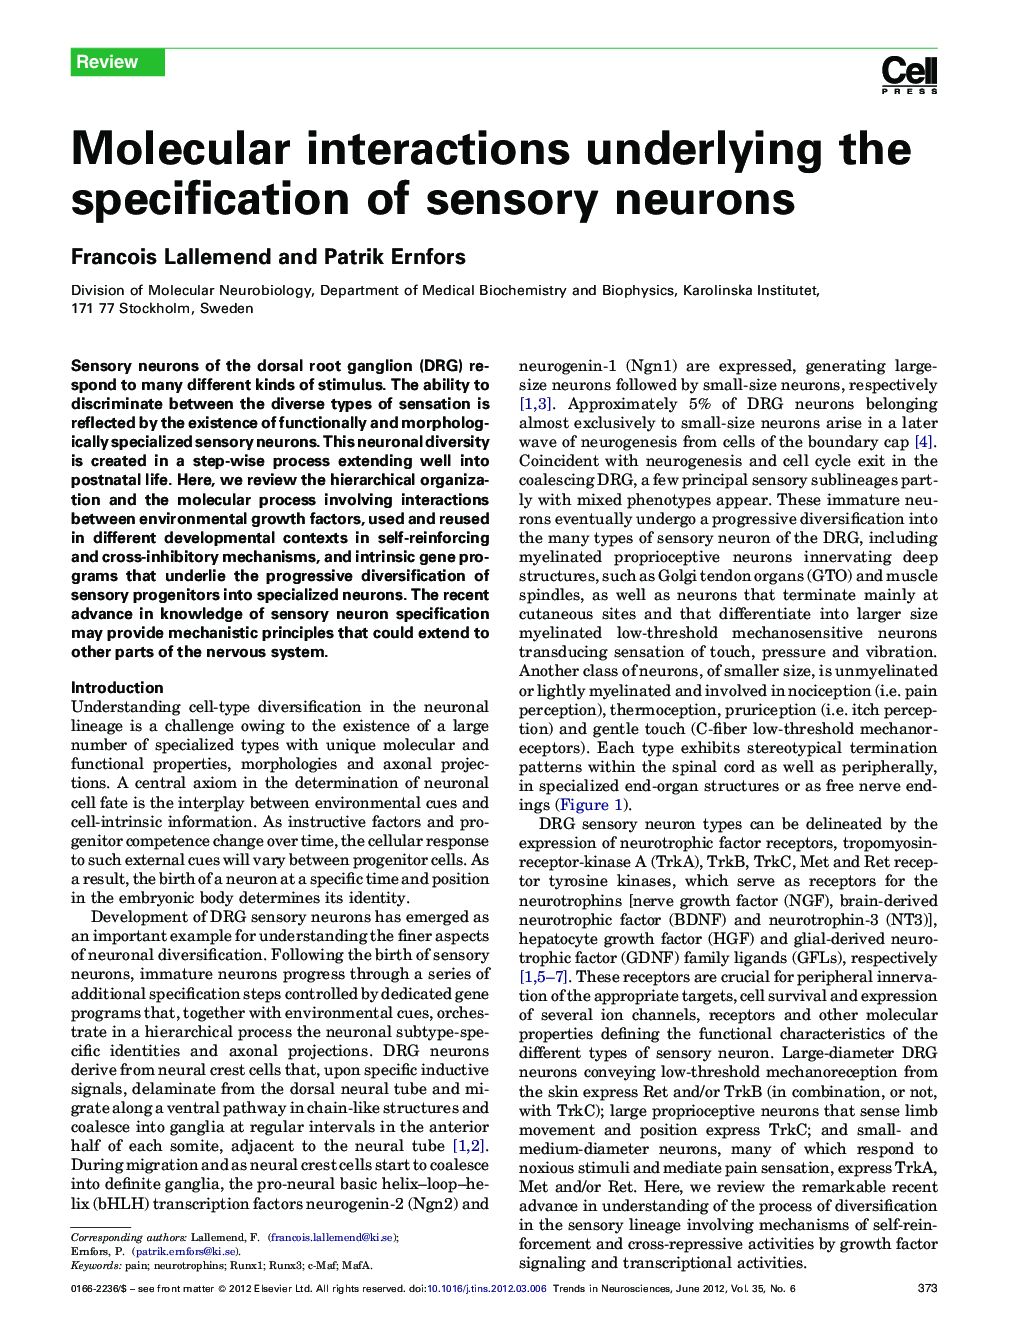 Molecular interactions underlying the specification of sensory neurons